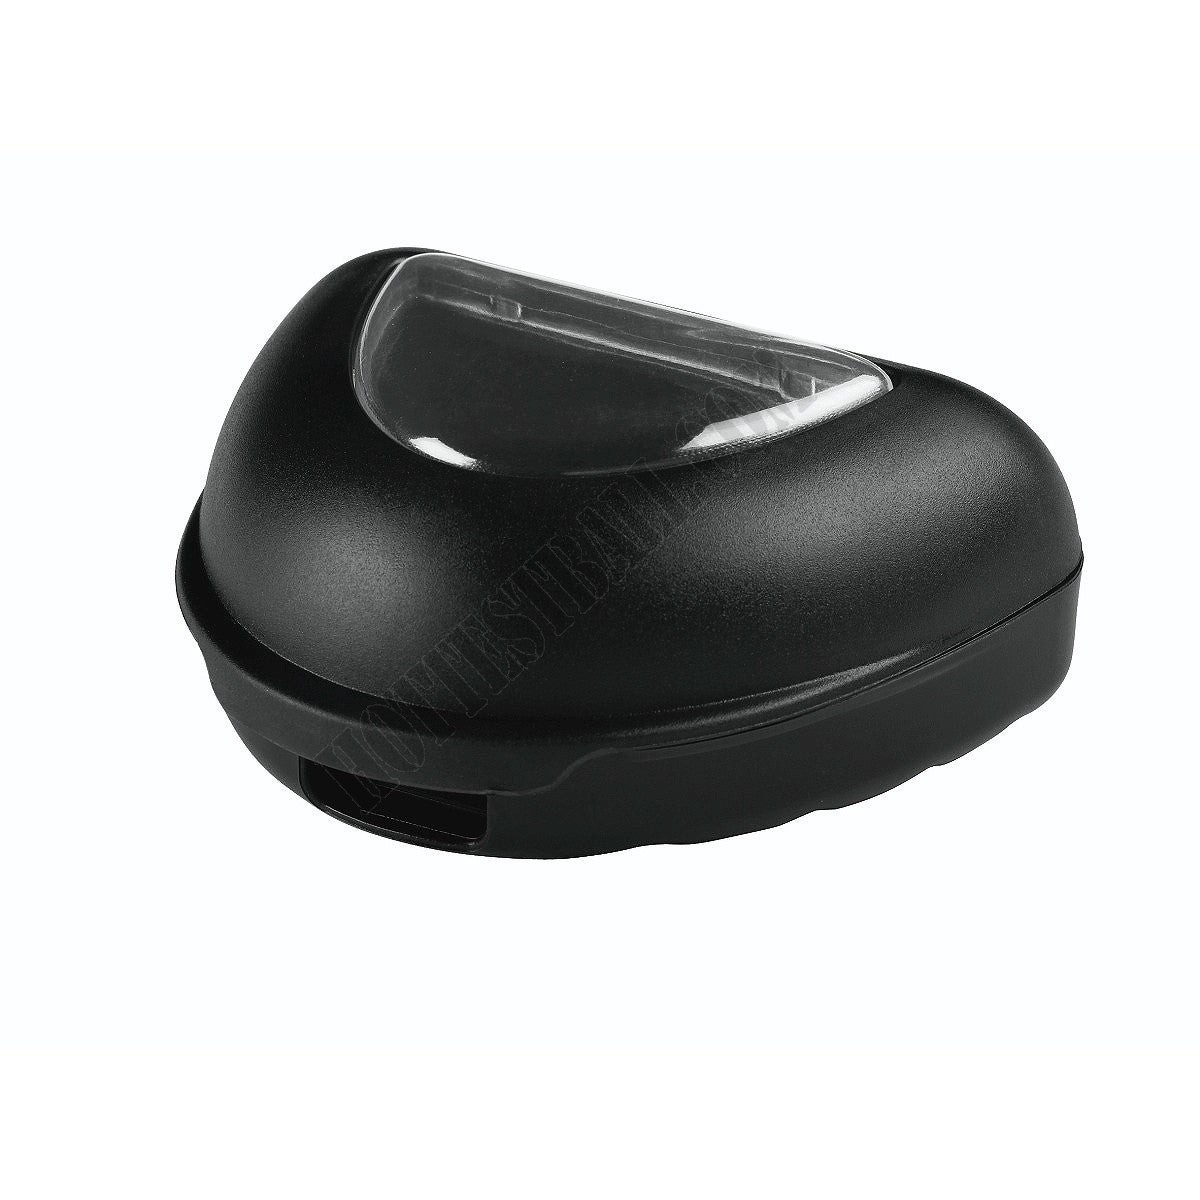 Mouth Guard Case - Wilson Discount Store - Mouth Guard Case - Wilson Discount Store